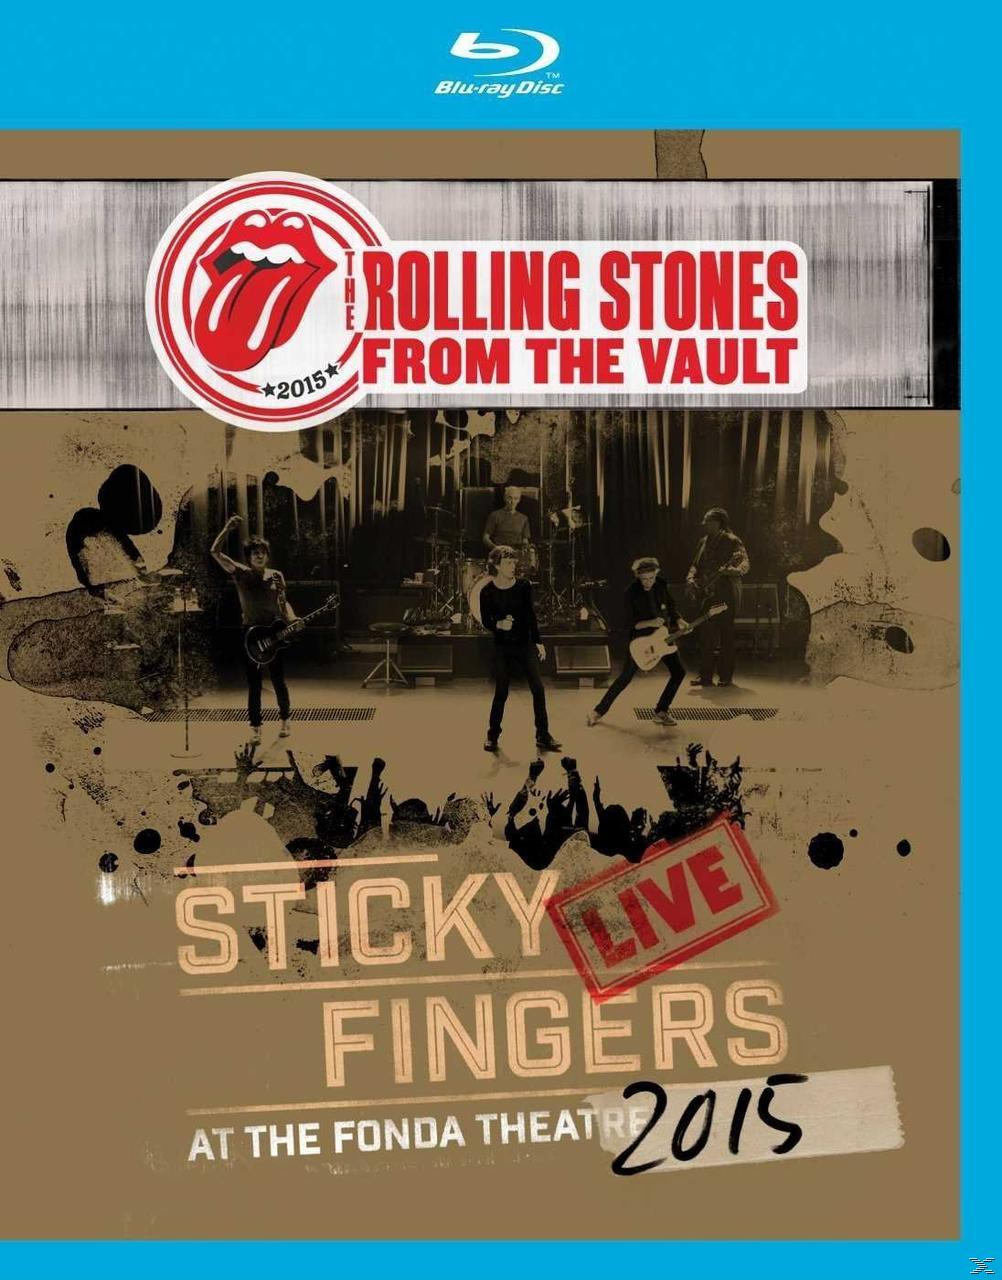 The Live 2015 Stones From (Blu-Ray) Rolling Fingers Vault: - - Sticky The (Blu-ray)